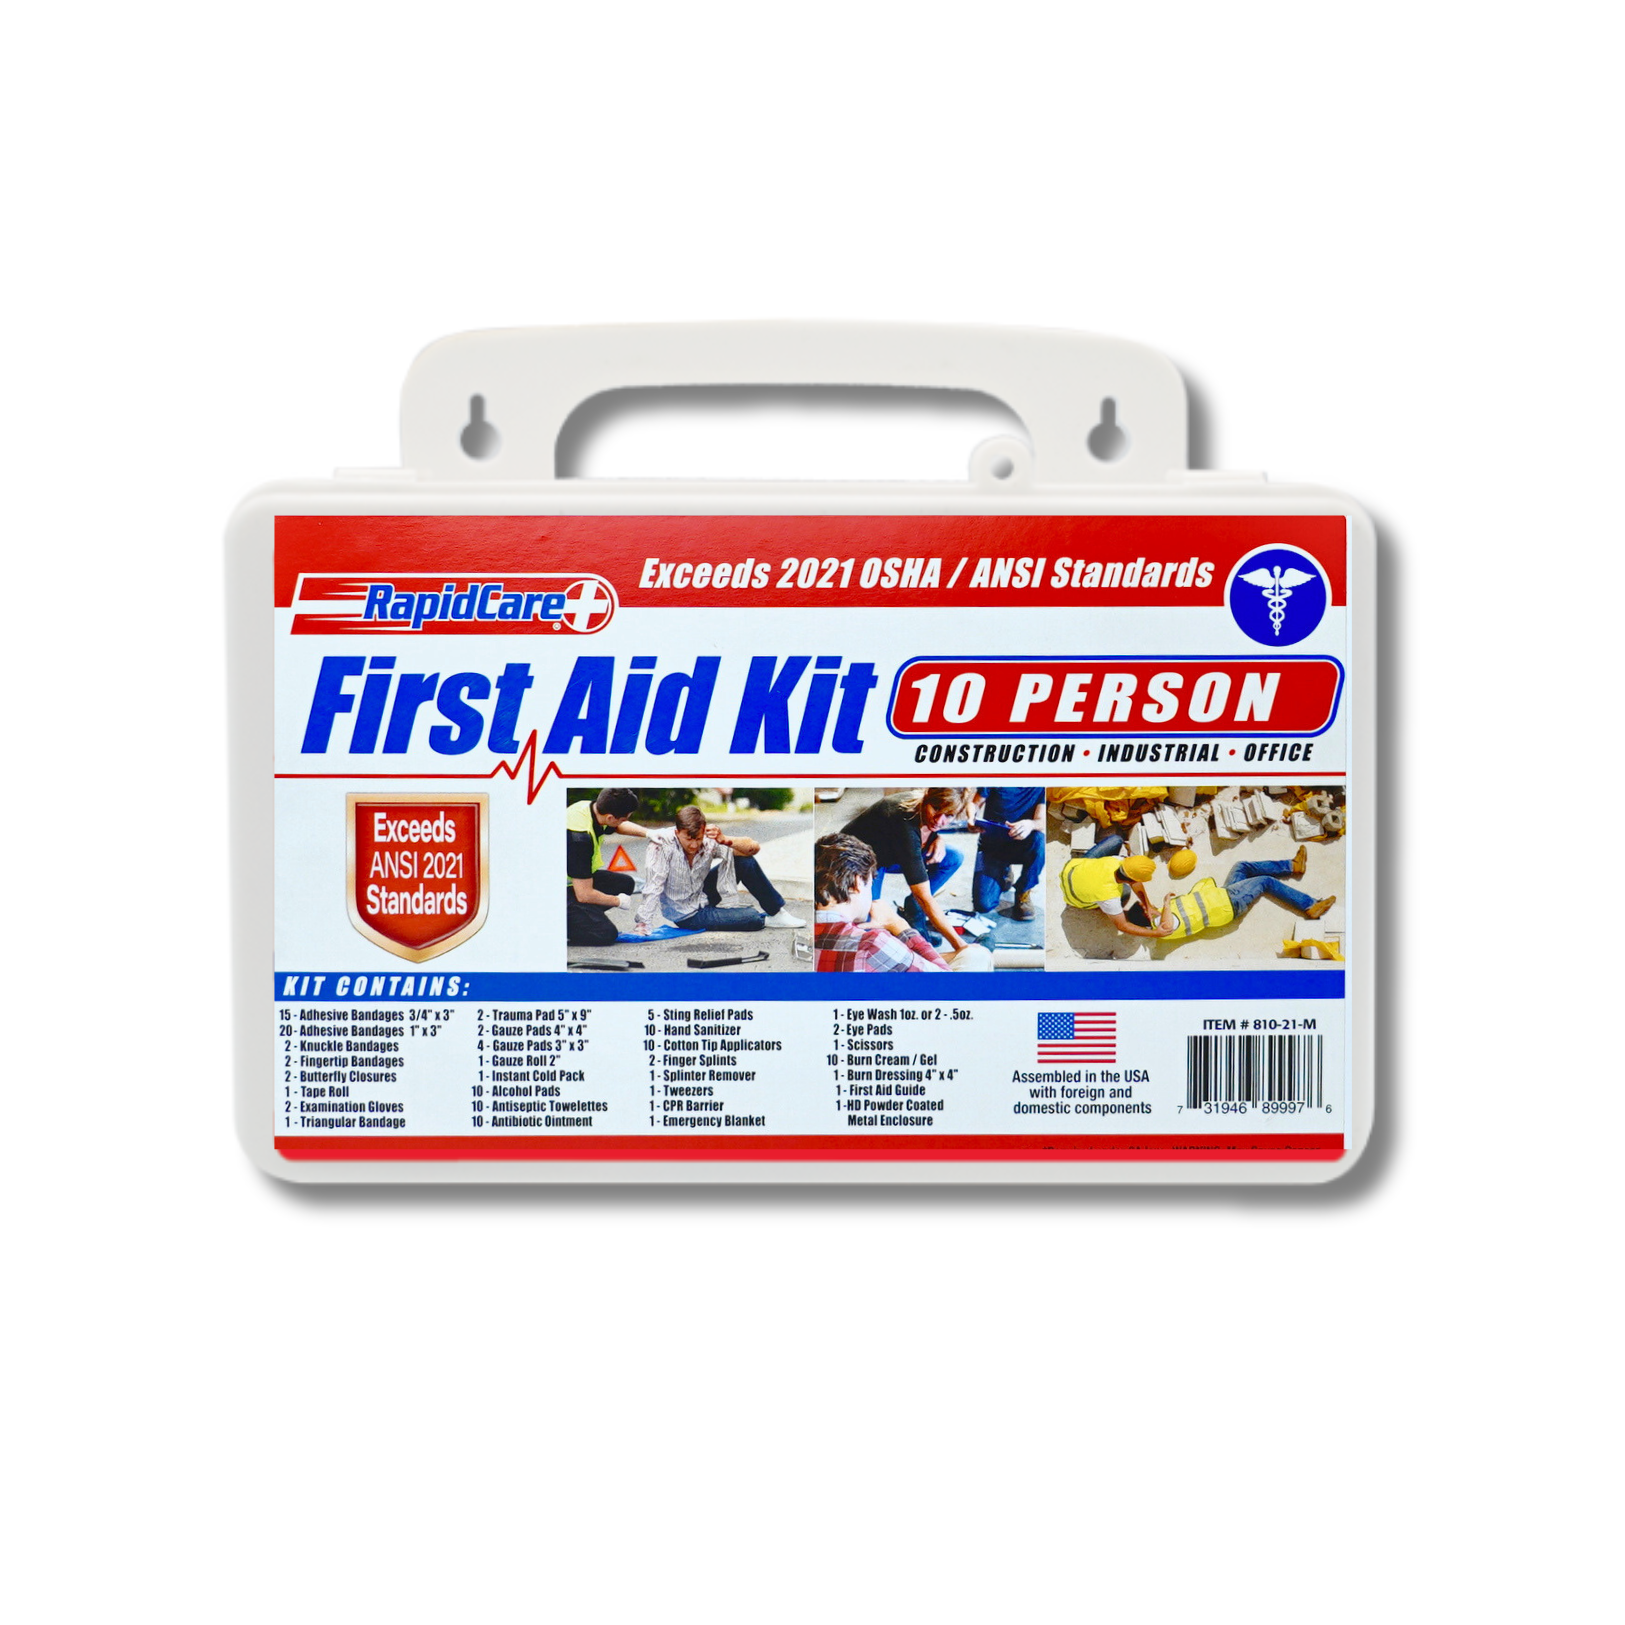 10 Person First Aid Kit - 2021(B) (162 Pc).